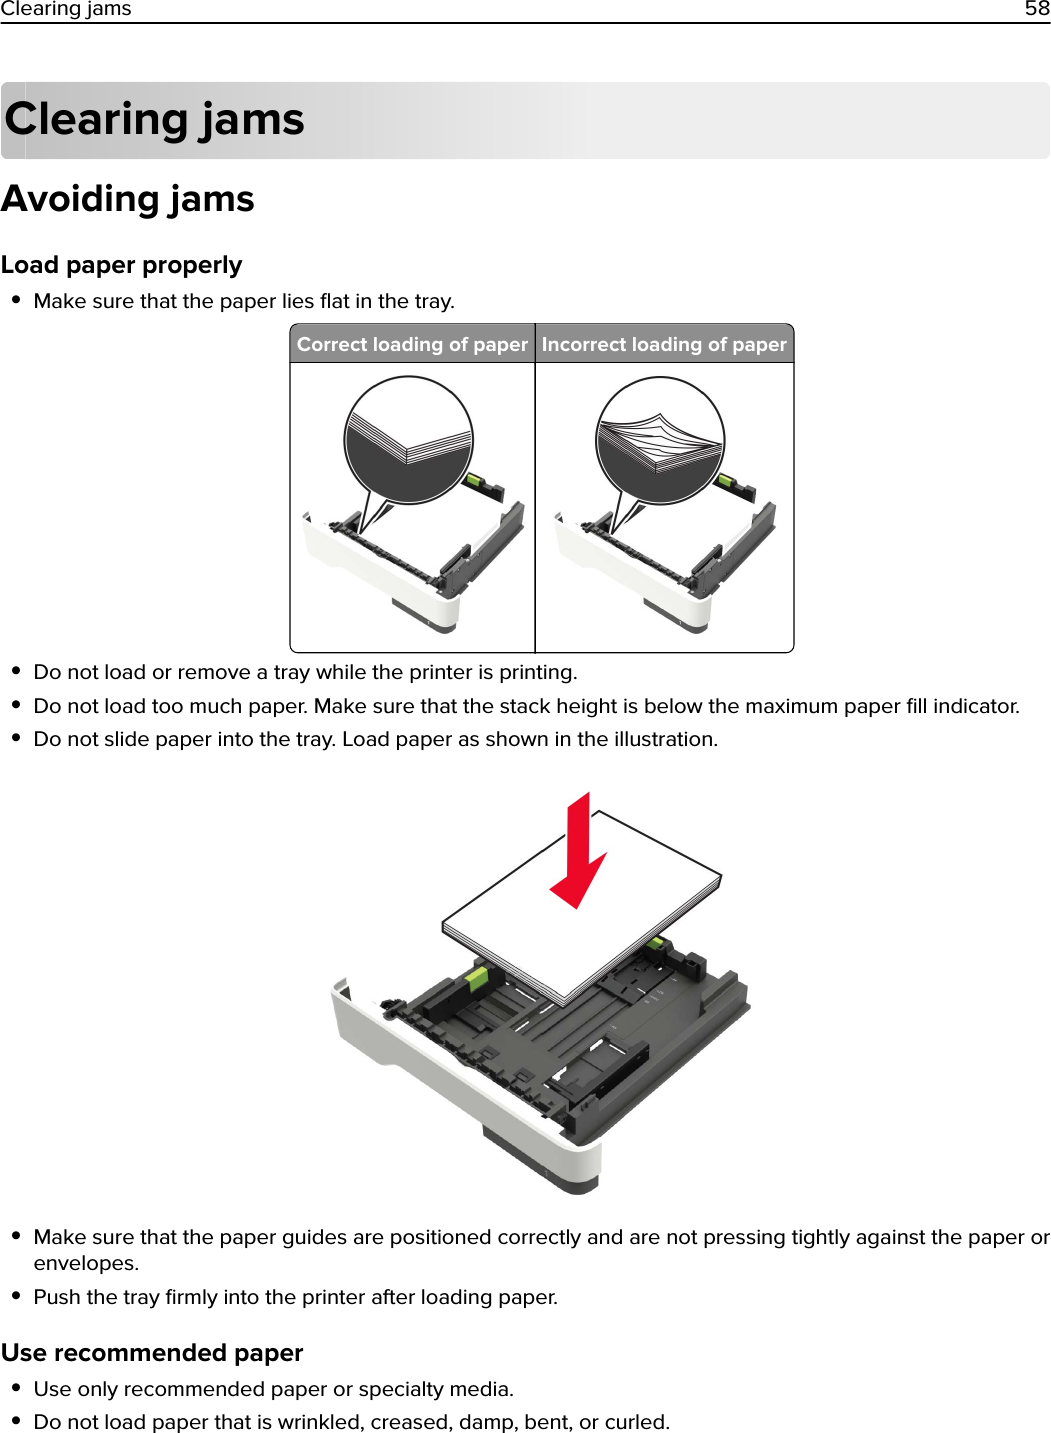 Clearing jamsAvoiding jamsLoad paper properly•Make sure that the paper lies ﬂat in the tray.Correct loading of paper Incorrect loading of paper•Do not load or remove a tray while the printer is printing.•Do not load too much paper. Make sure that the stack height is below the maximum paper ﬁll indicator.•Do not slide paper into the tray. Load paper as shown in the illustration.•Make sure that the paper guides are positioned correctly and are not pressing tightly against the paper orenvelopes.•Push the tray ﬁrmly into the printer after loading paper.Use recommended paper•Use only recommended paper or specialty media.•Do not load paper that is wrinkled, creased, damp, bent, or curled.Clearing jams 58